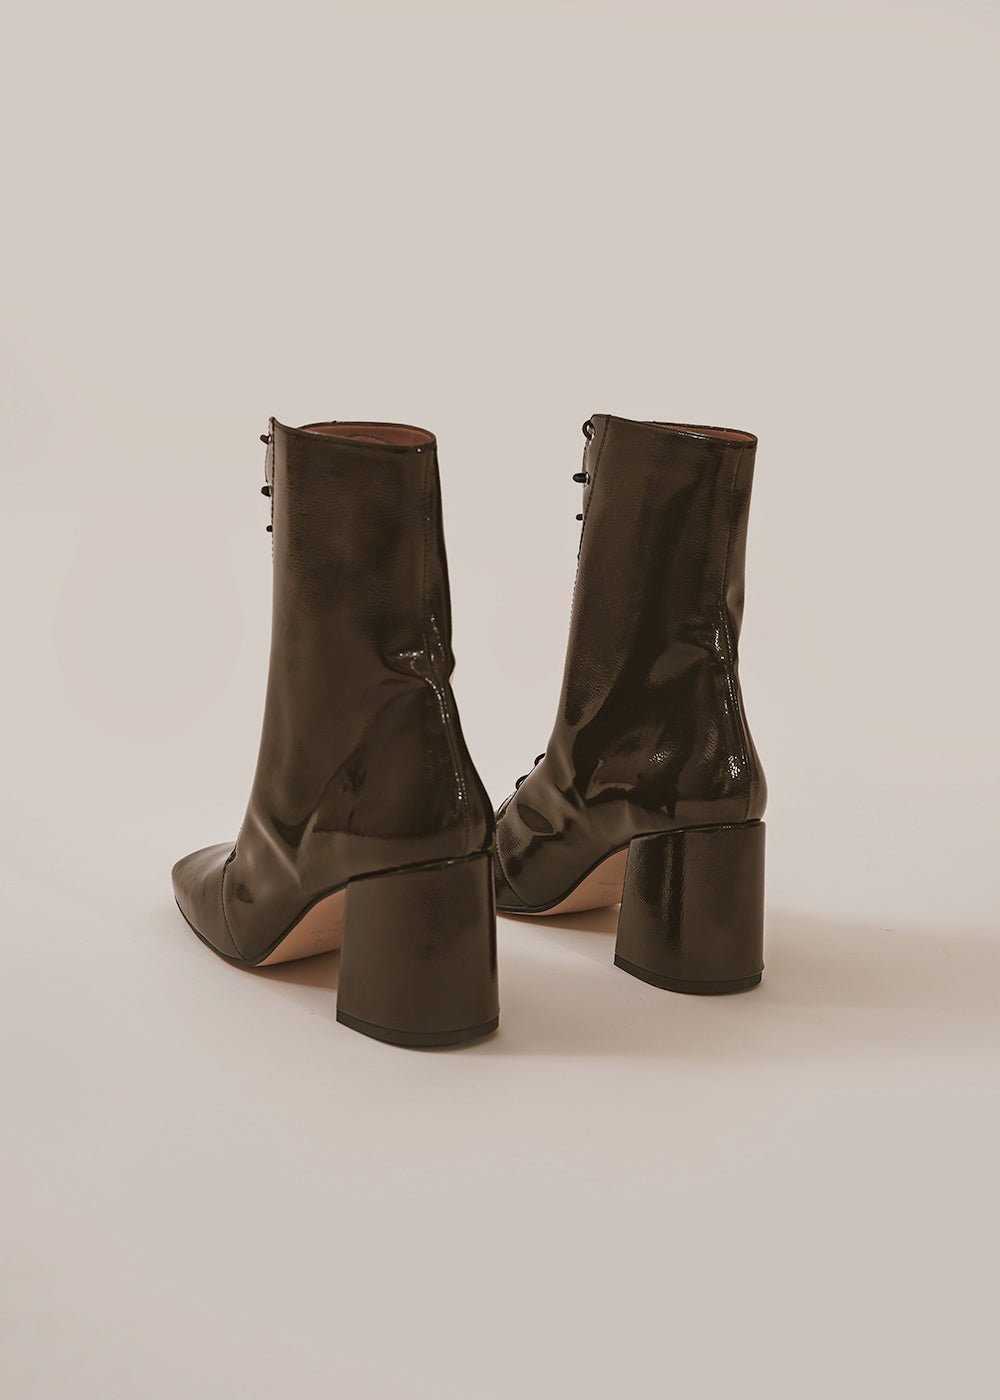 About Arianne The Vegan Stevie Boot - New Classics Studios Sustainable Ethical Fashion Canada